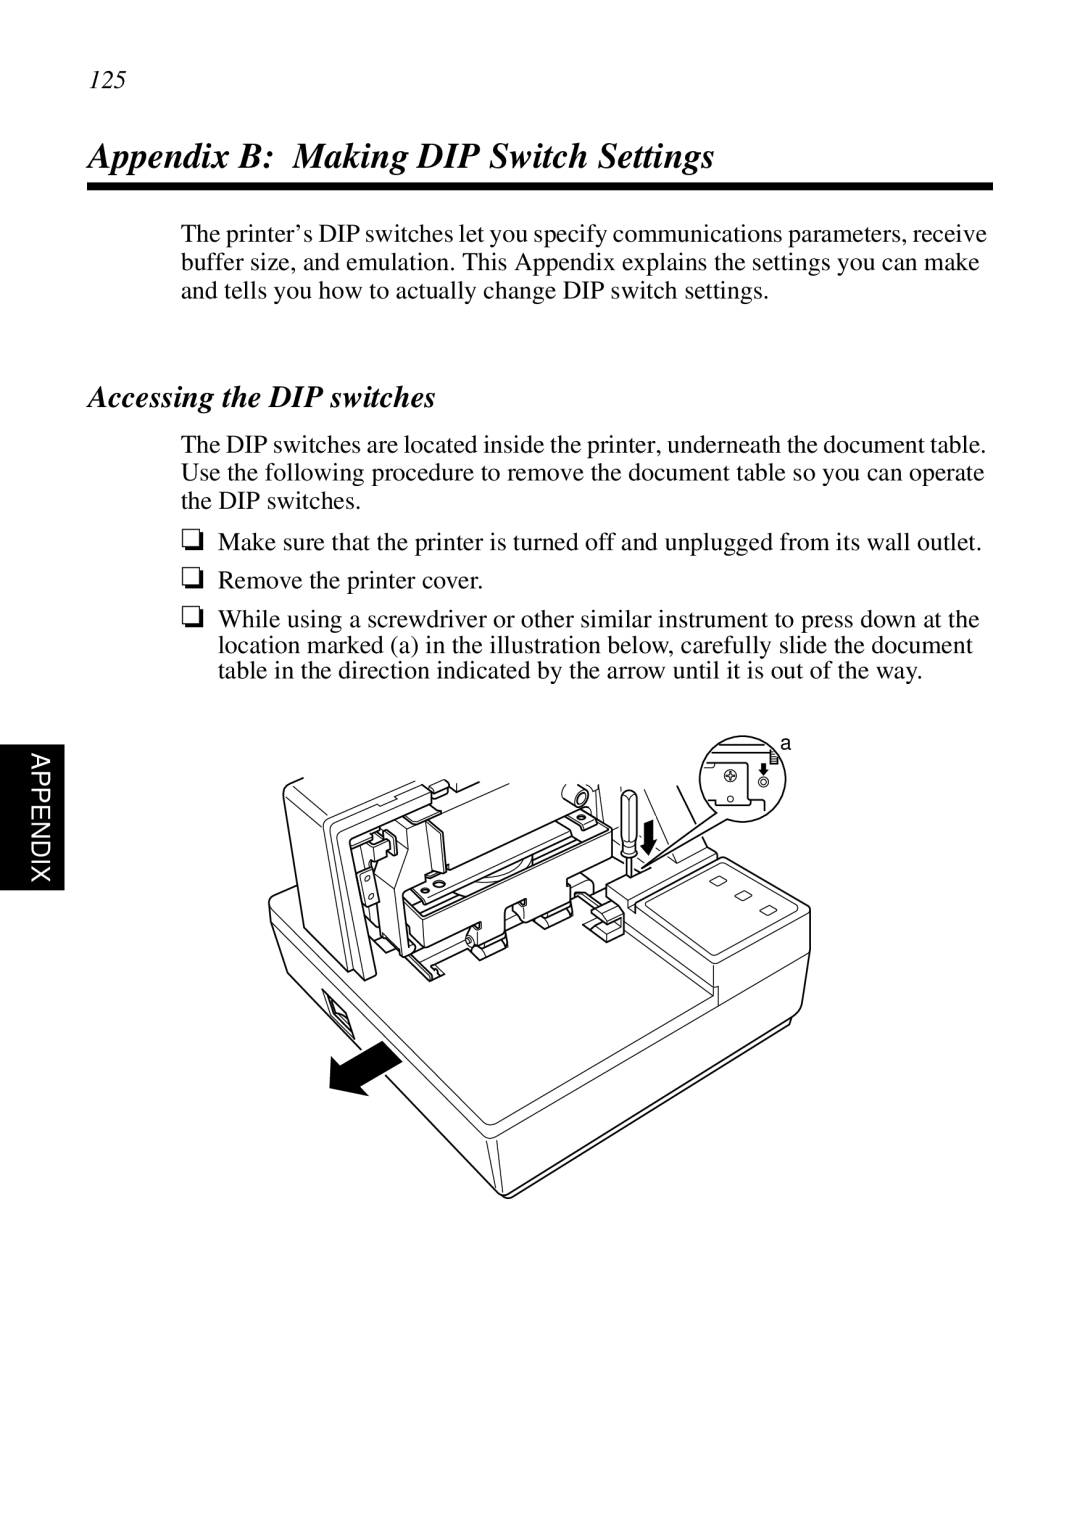 Star Micronics SP298 user manual Appendix B Making DIP Switch Settings, Accessing the DIP switches 